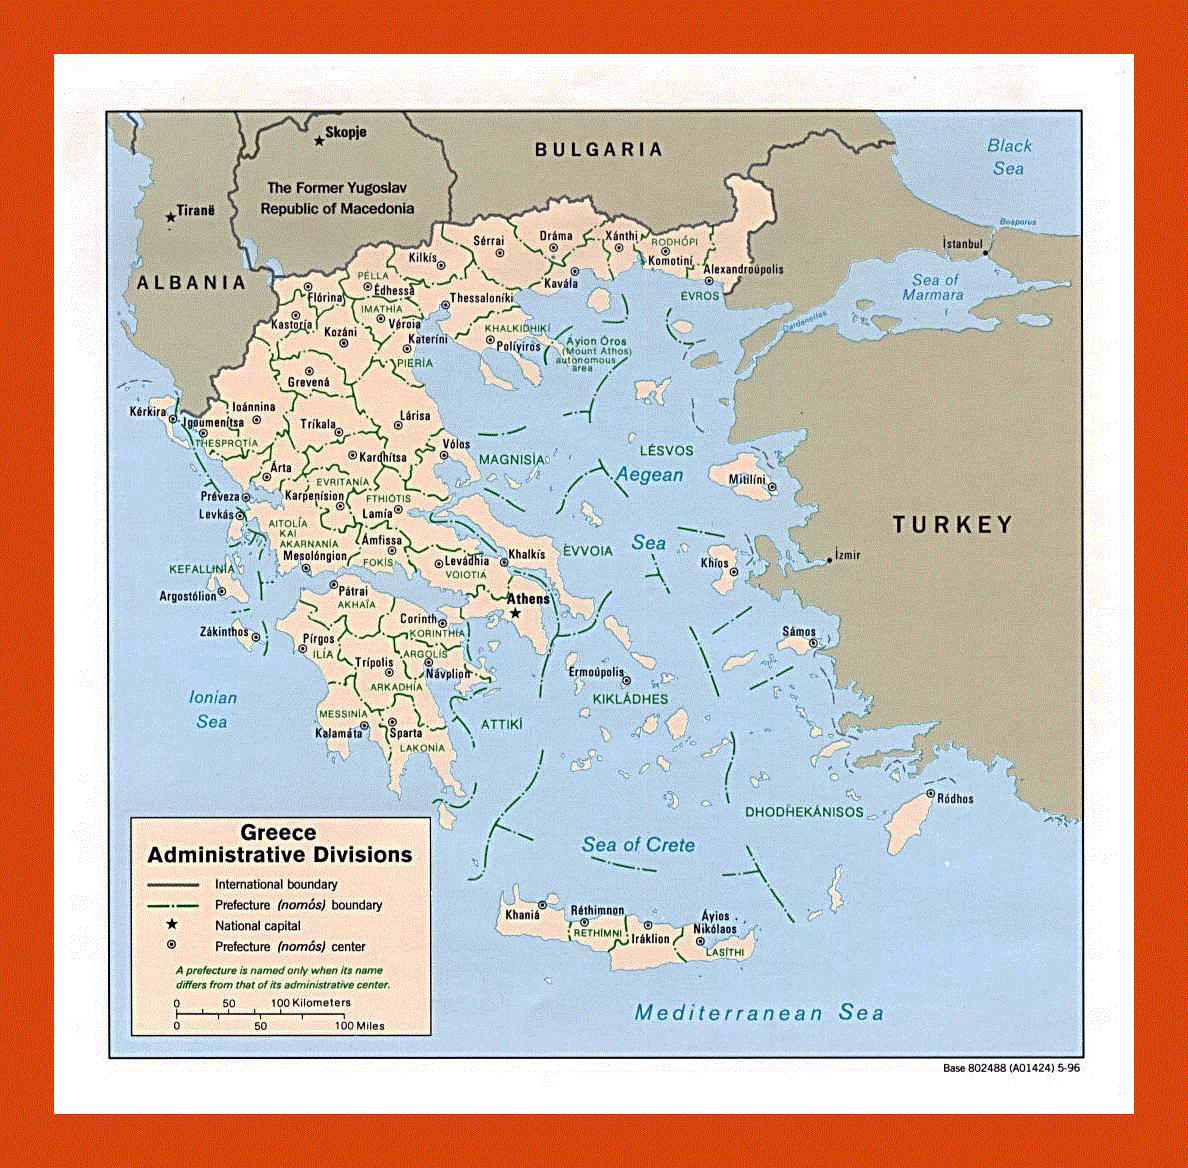 Administrative divisions map of Greece - 1996